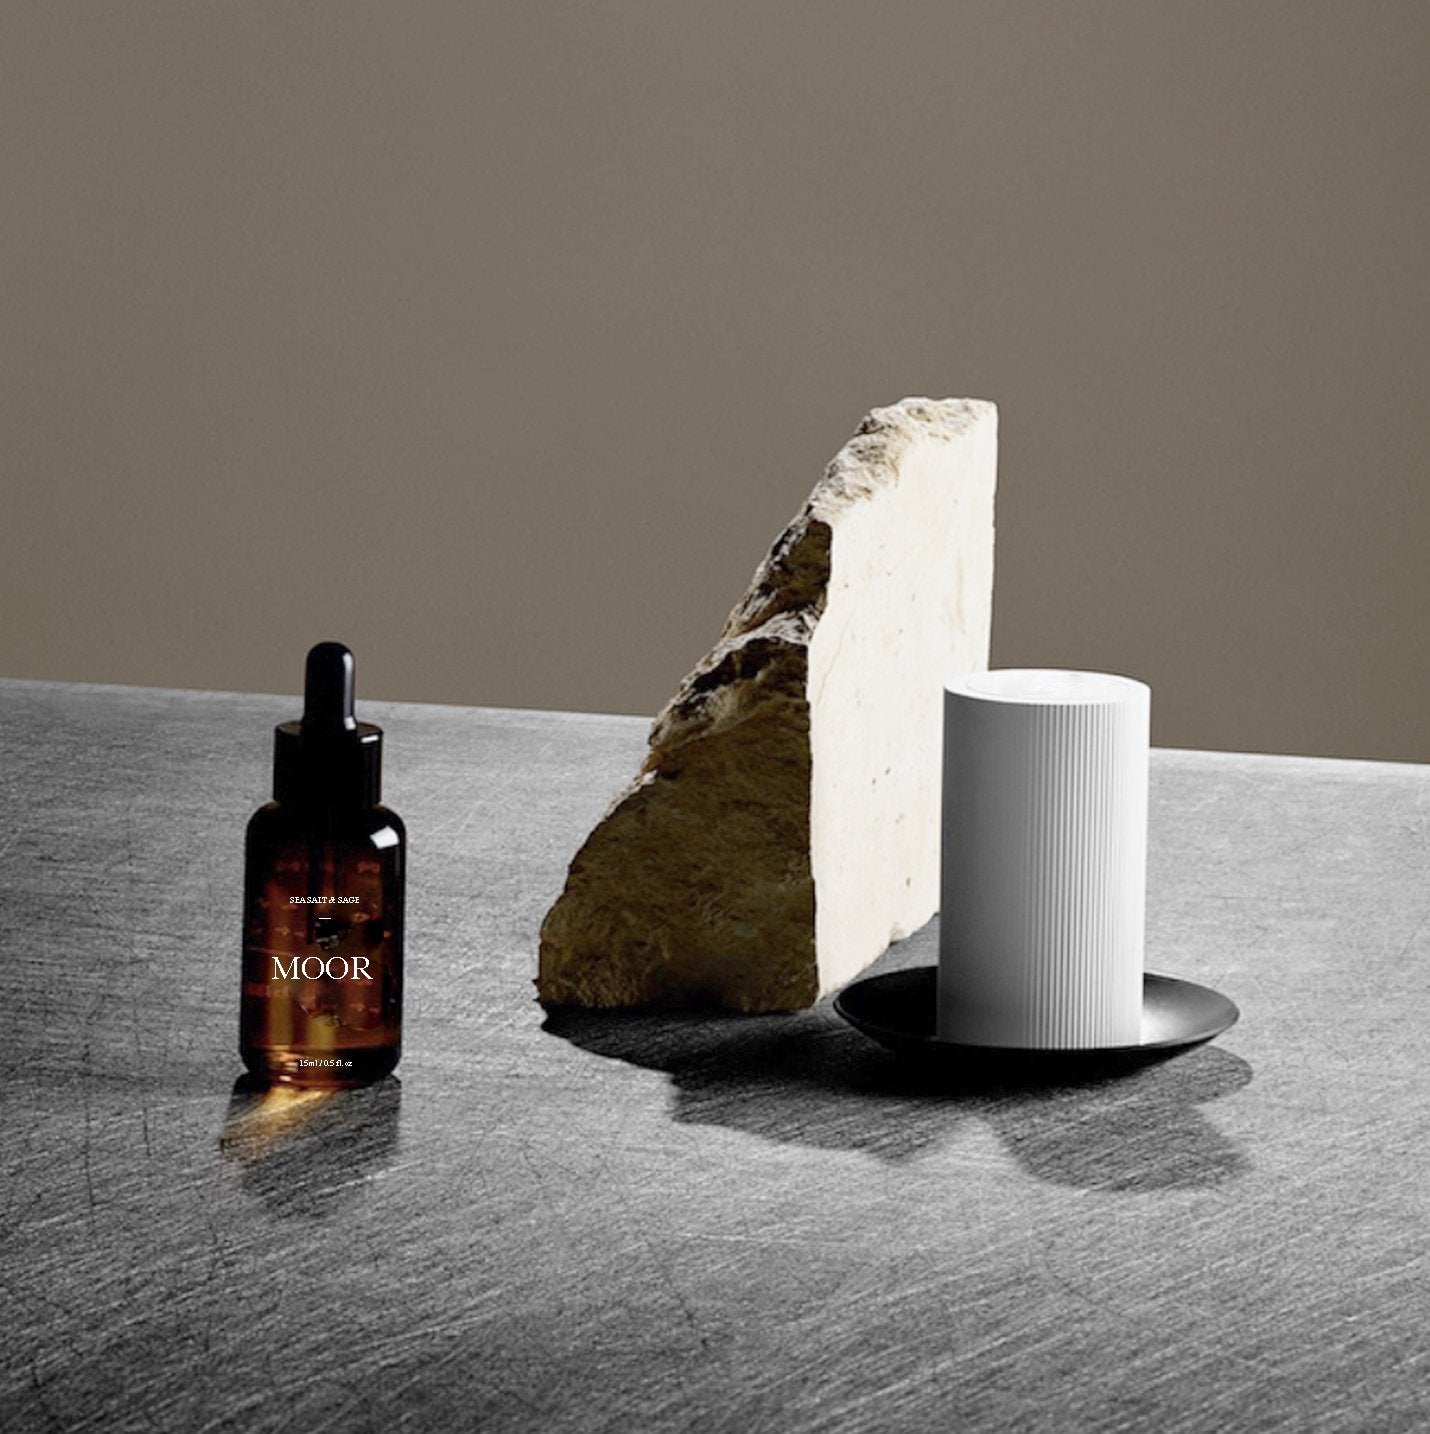 PRE-ORDER - MOOR Scented Block - Limited Edition - Made By Ethereal